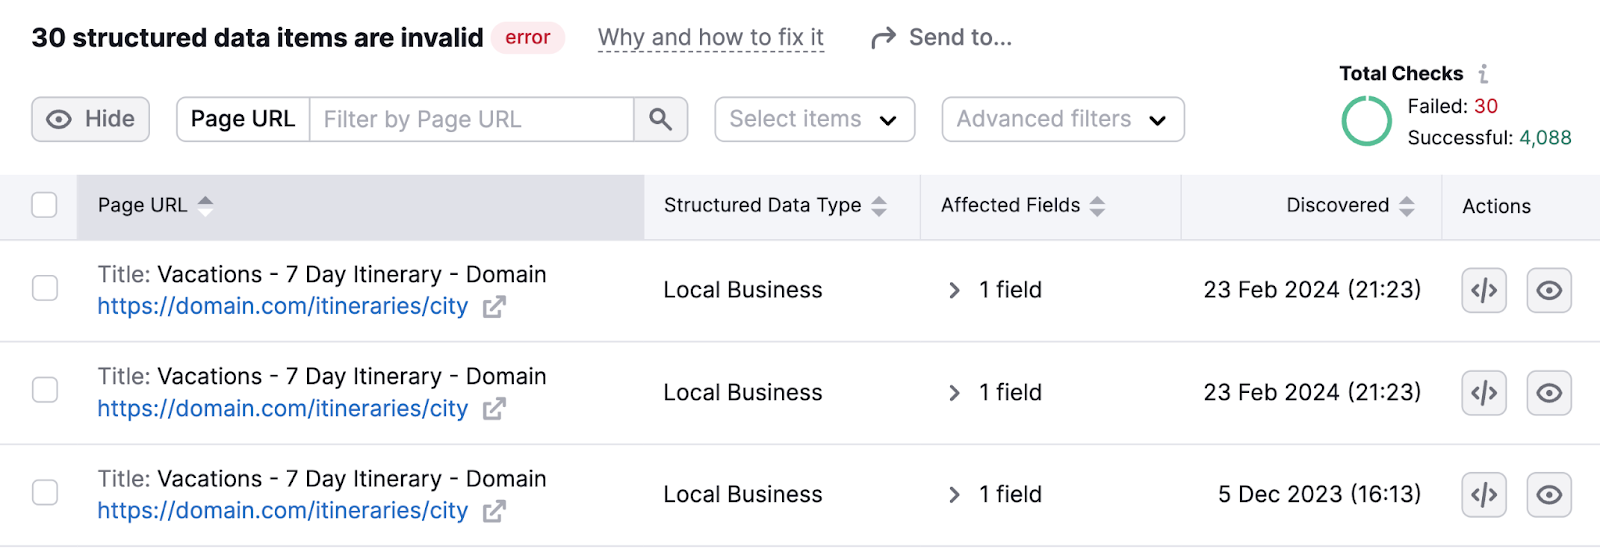 page url of invalid structured data item, the data type such as local business schema, and the affected field